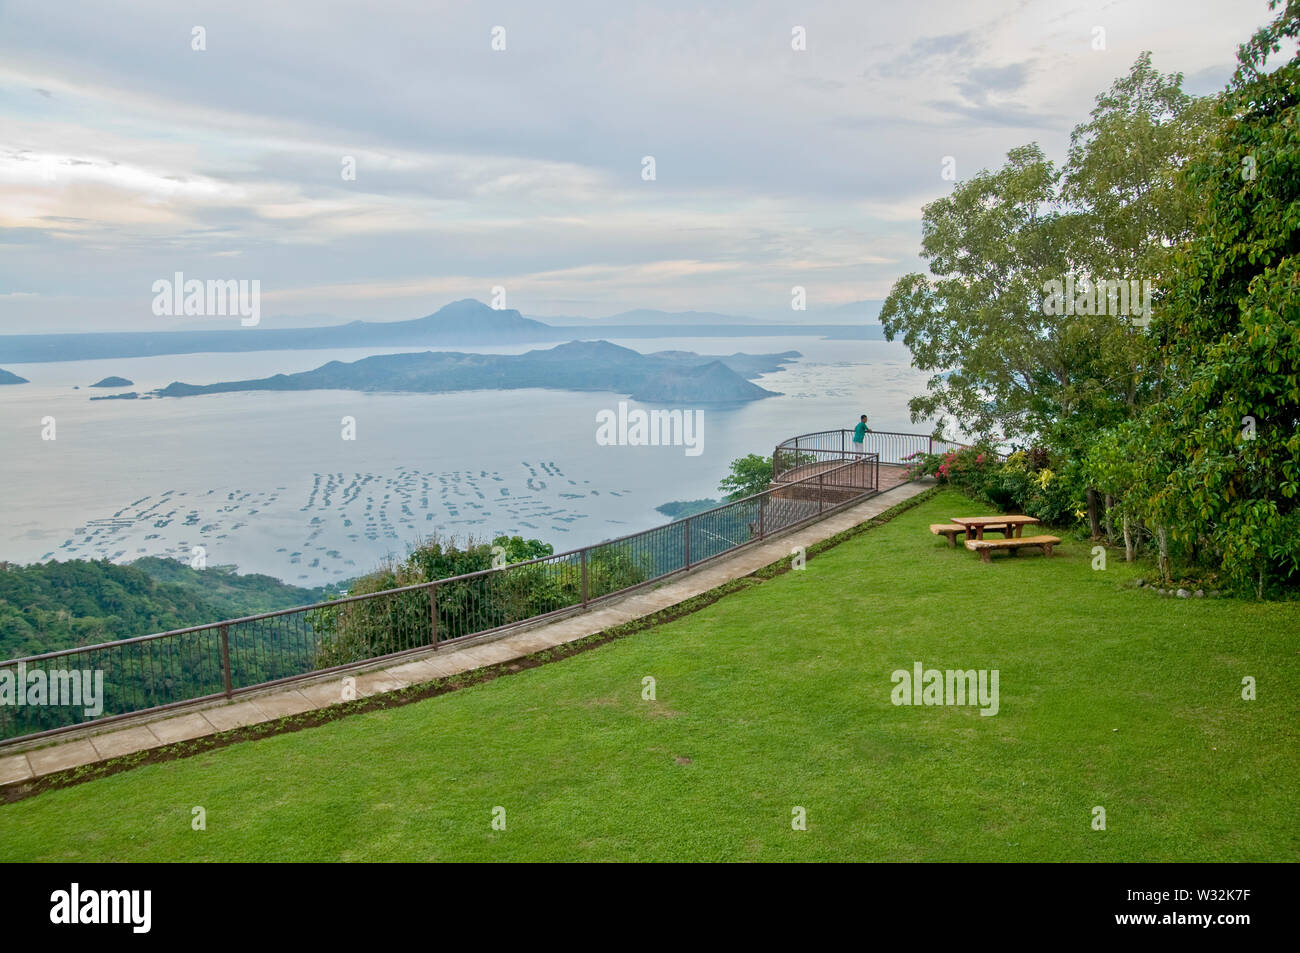 A view of Taal Lake and Volcano from the garden of a country home in Tagaytay. The second summer capital of the Philippine because of the cool climate. Stock Photo